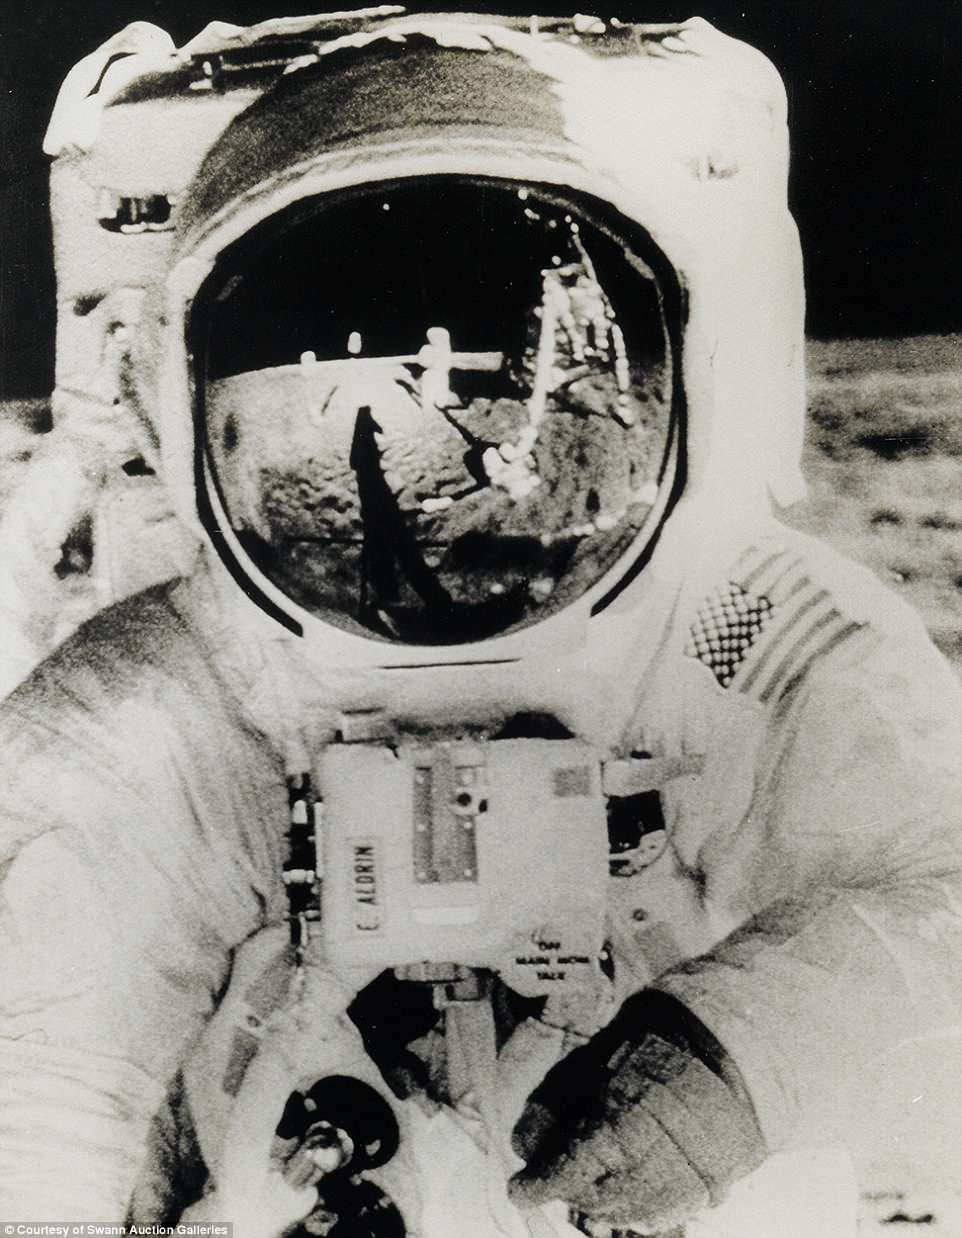 An incredible collection of 15,000 photos from the US's remarkable space programme is going up for auction. Pictured is a photo of Buzz Aldrin taken by Neil Armstrong on the lunar surface